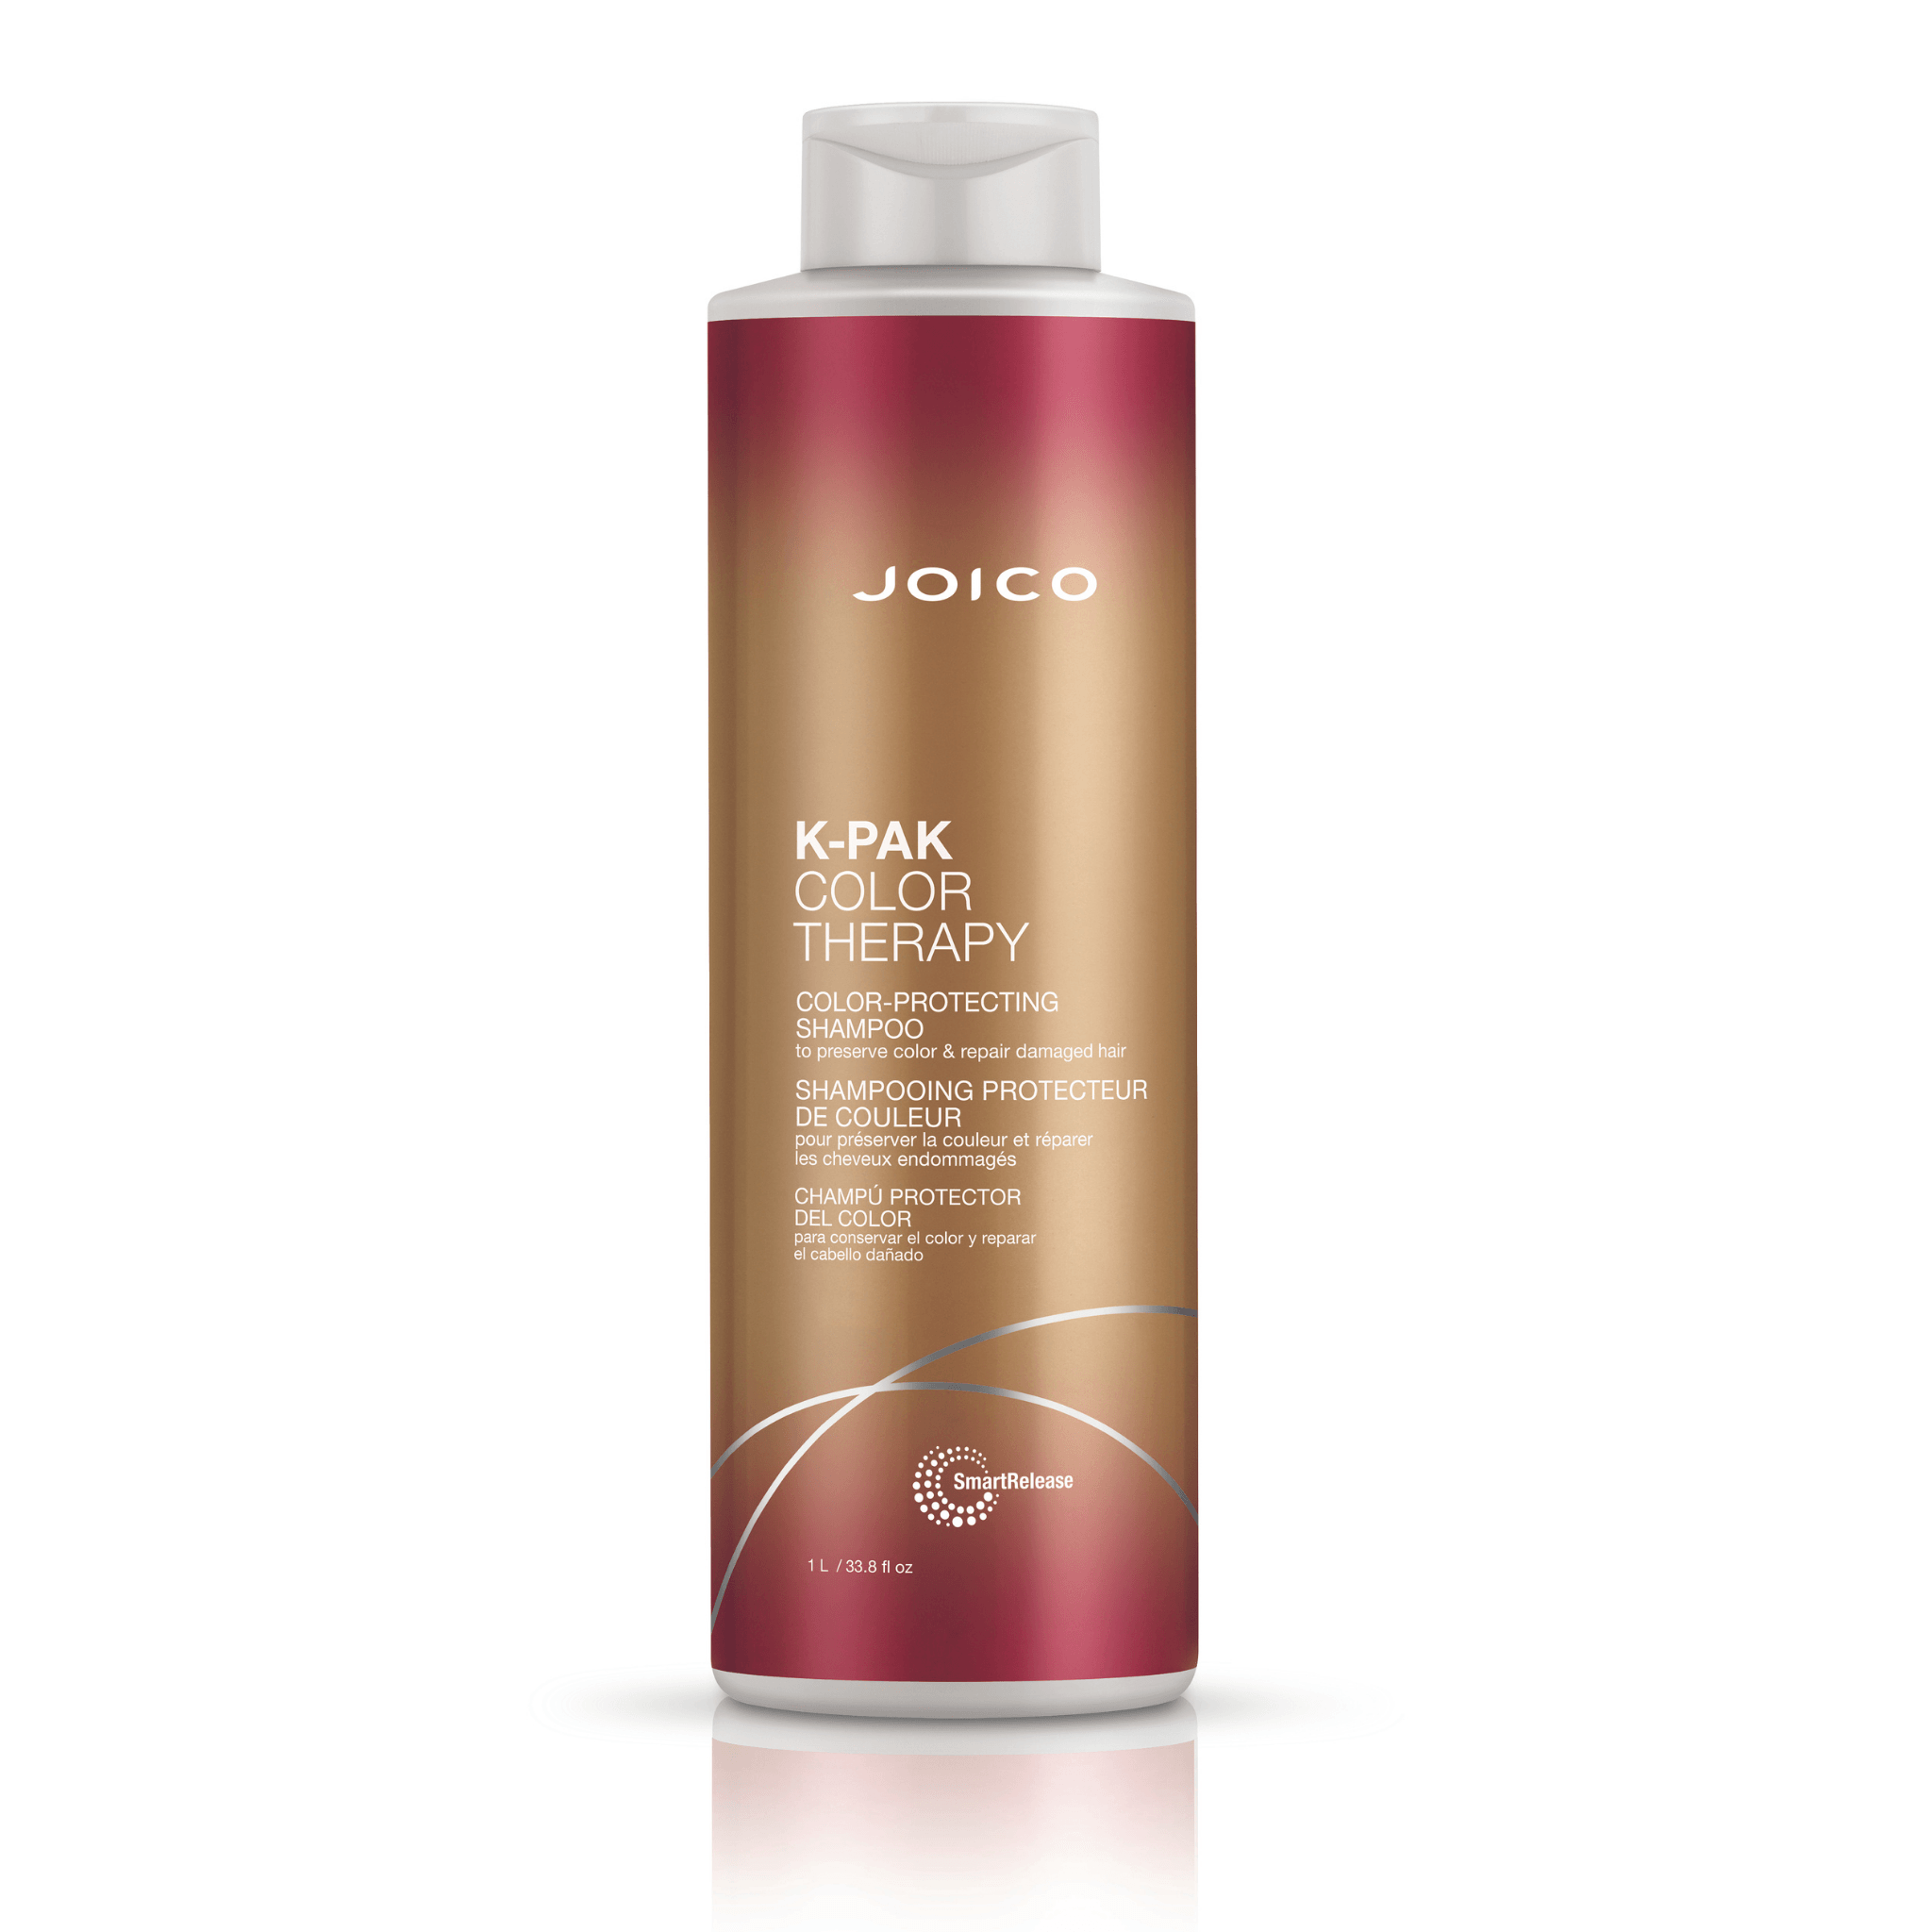 Joico. Shampoing K-Pak Color Therapy - 1000ml - Concept C. Shop